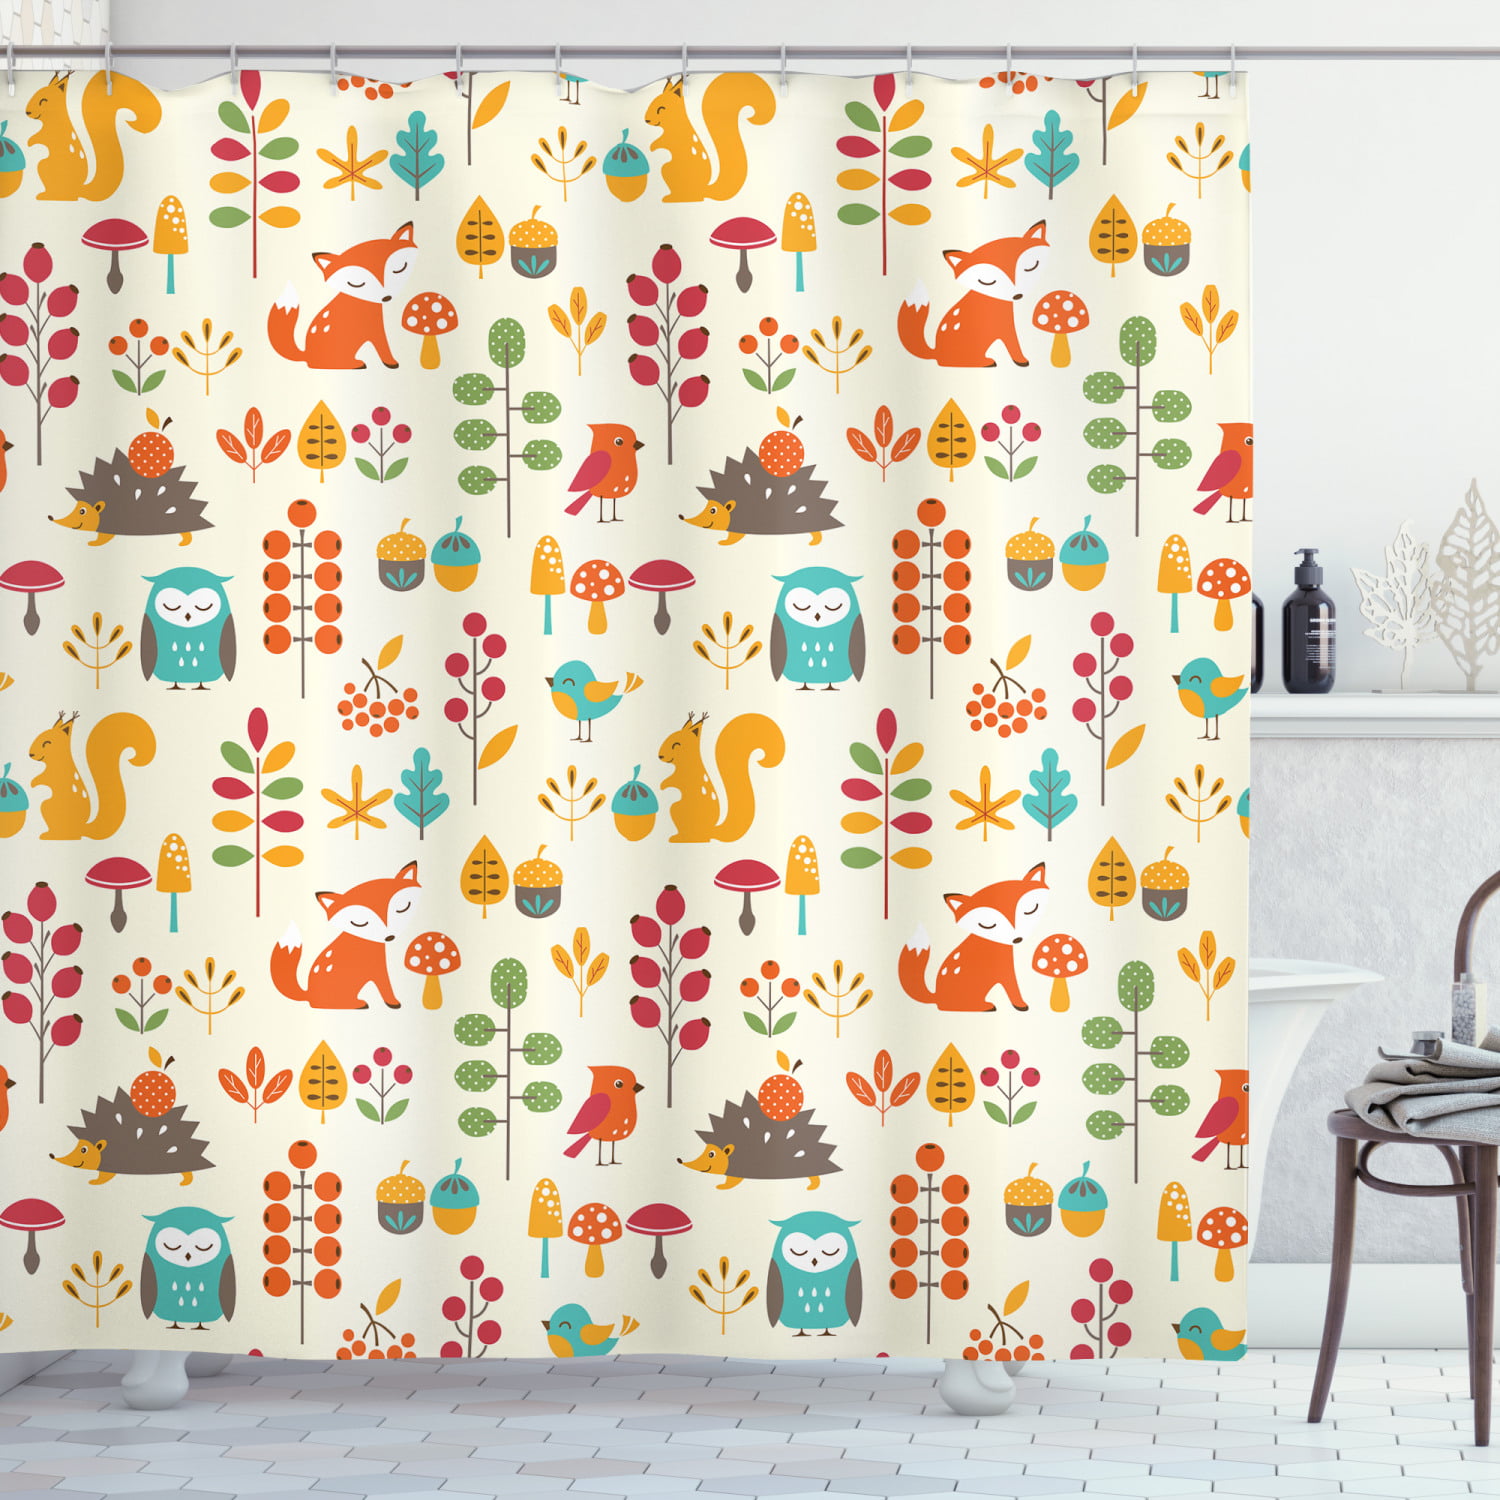 Wooden Hole American Red Squirrel Shower Curtain Set Bathroom Waterpoof Fabric 